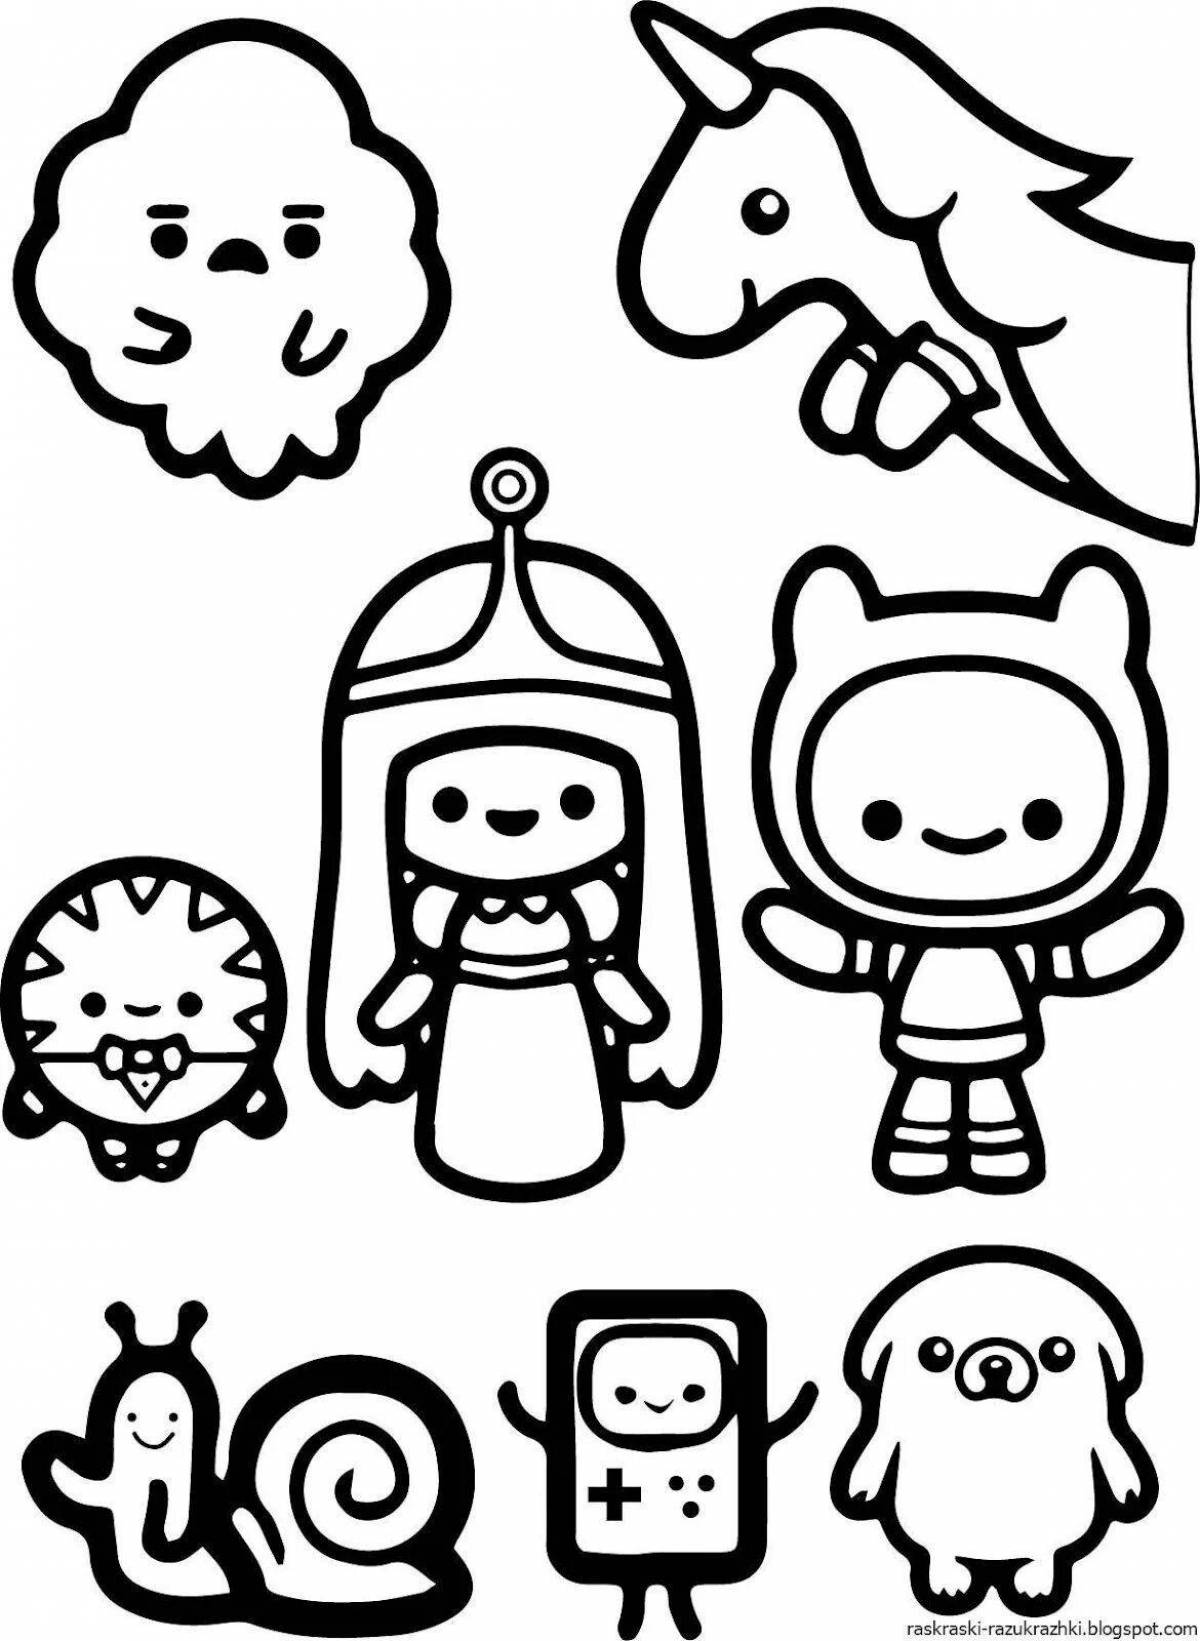 Fascinating coloring pages with stickers